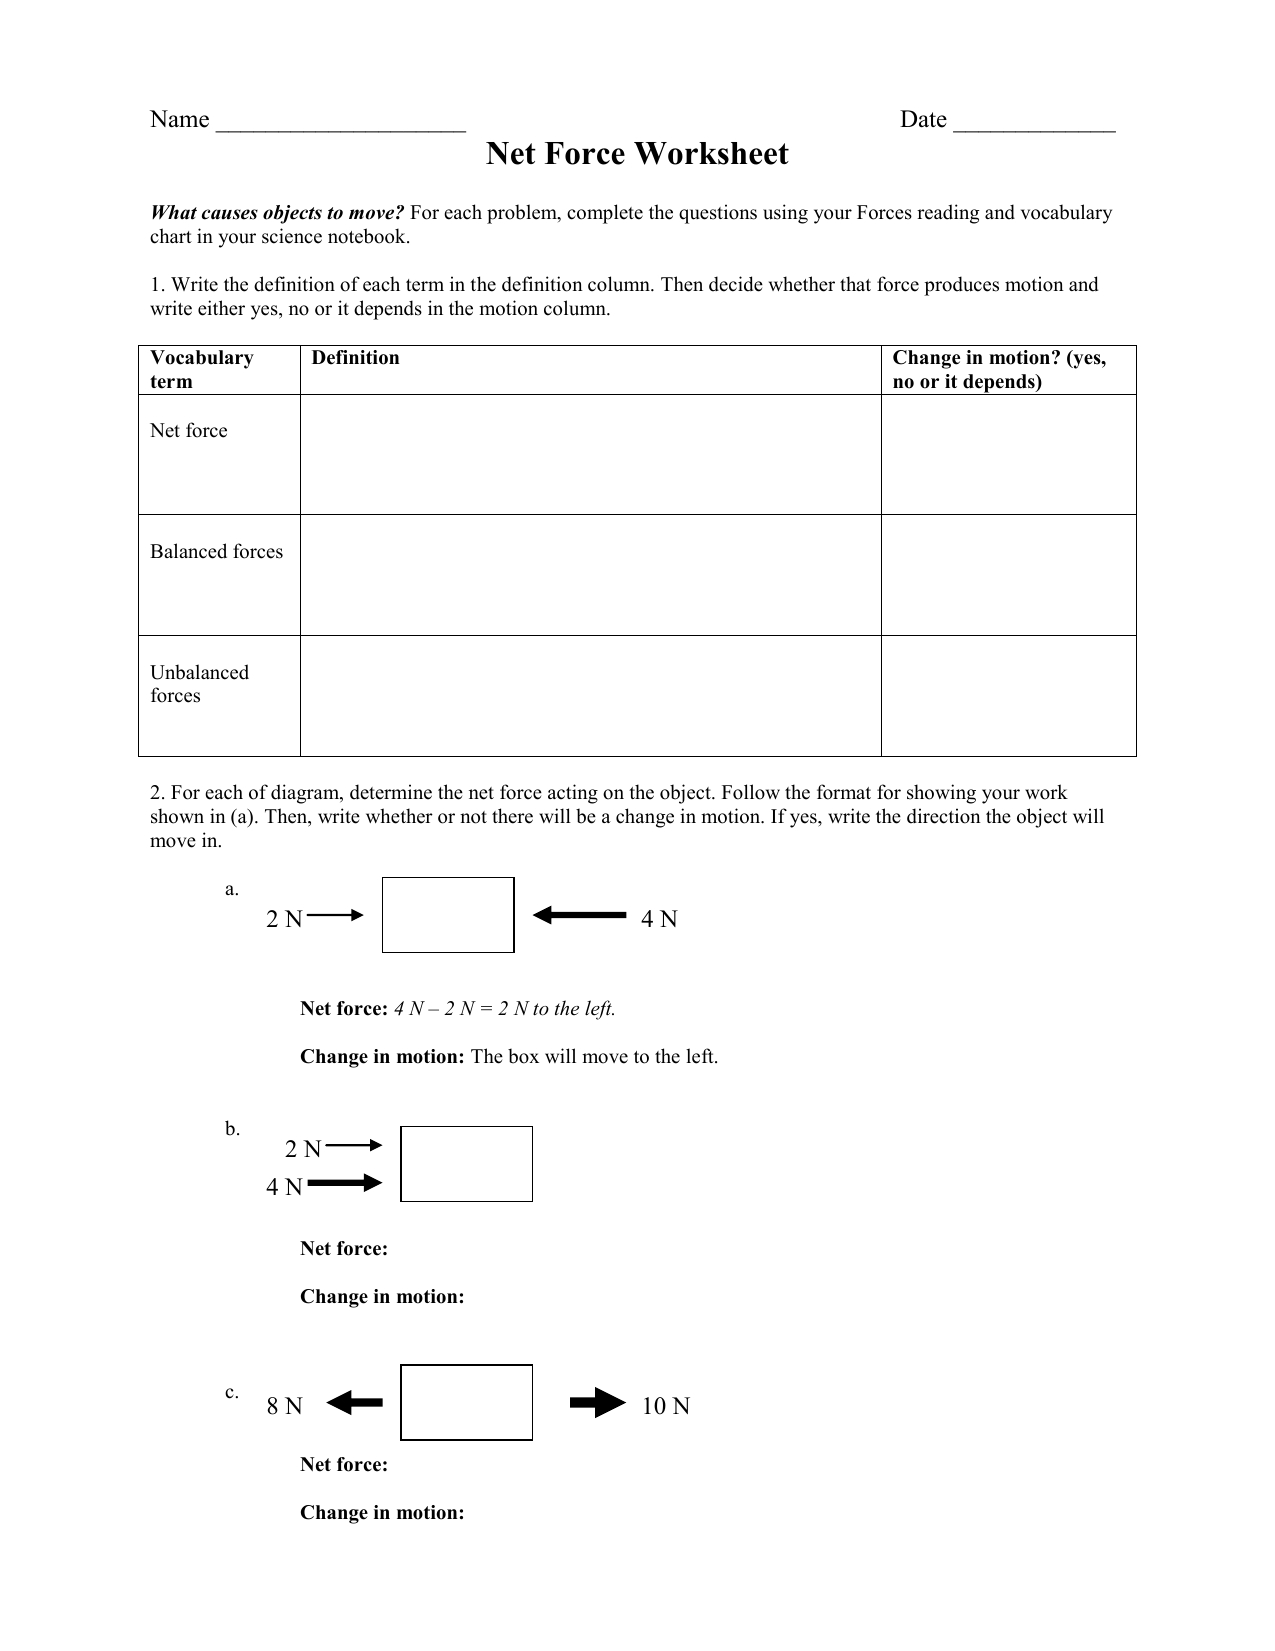 Net Force Worksheet  Crjh 8Th Grade Science For Net Force Worksheet Answers